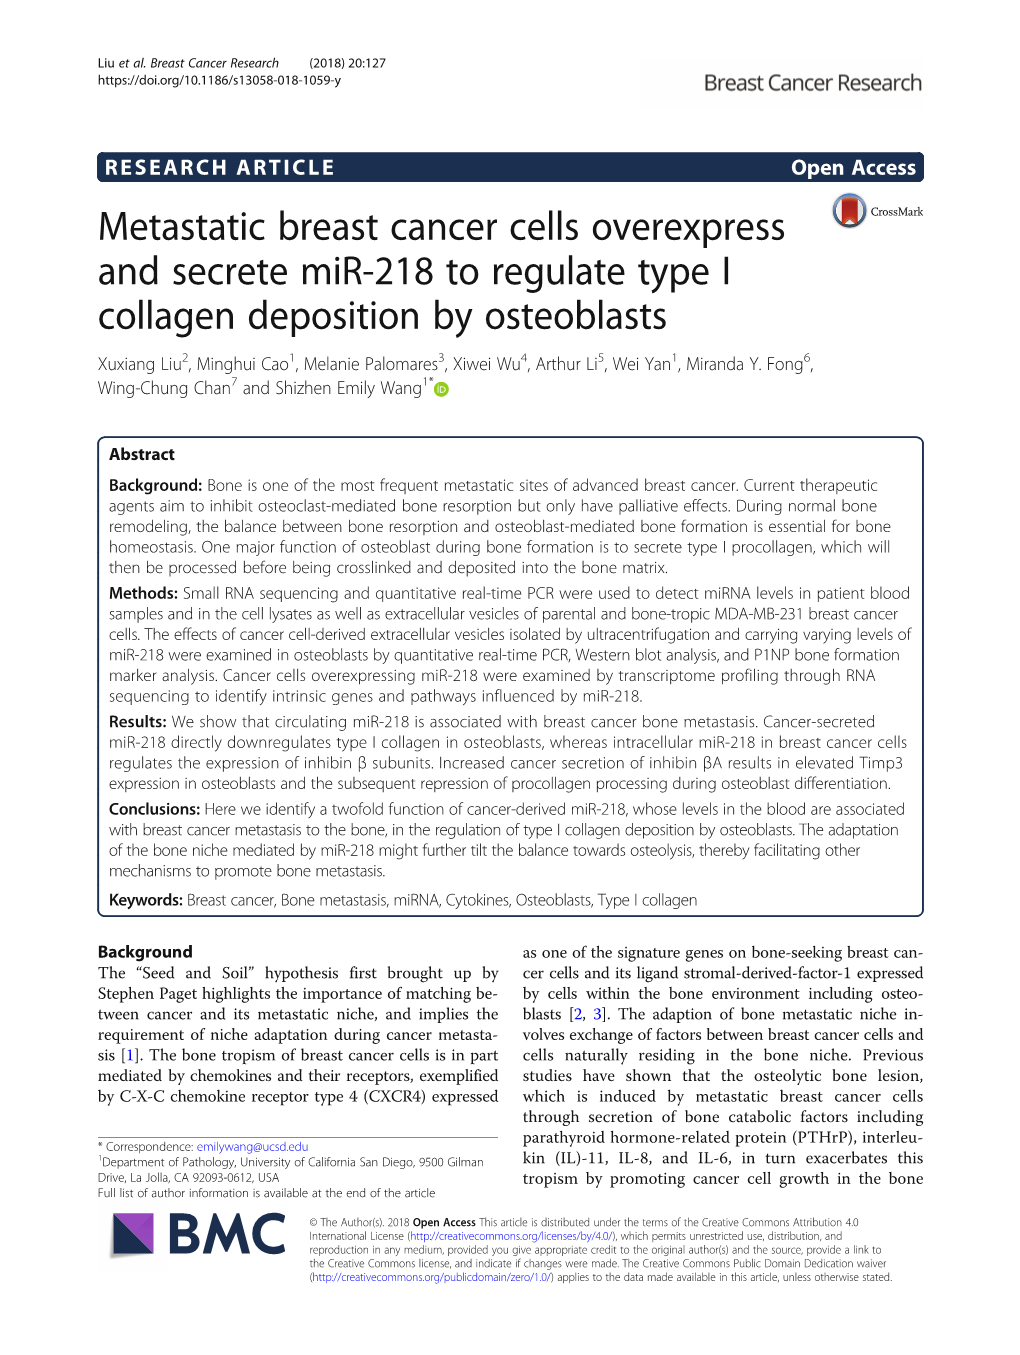 Metastatic Breast Cancer Cells Overexpress and Secrete Mir-218